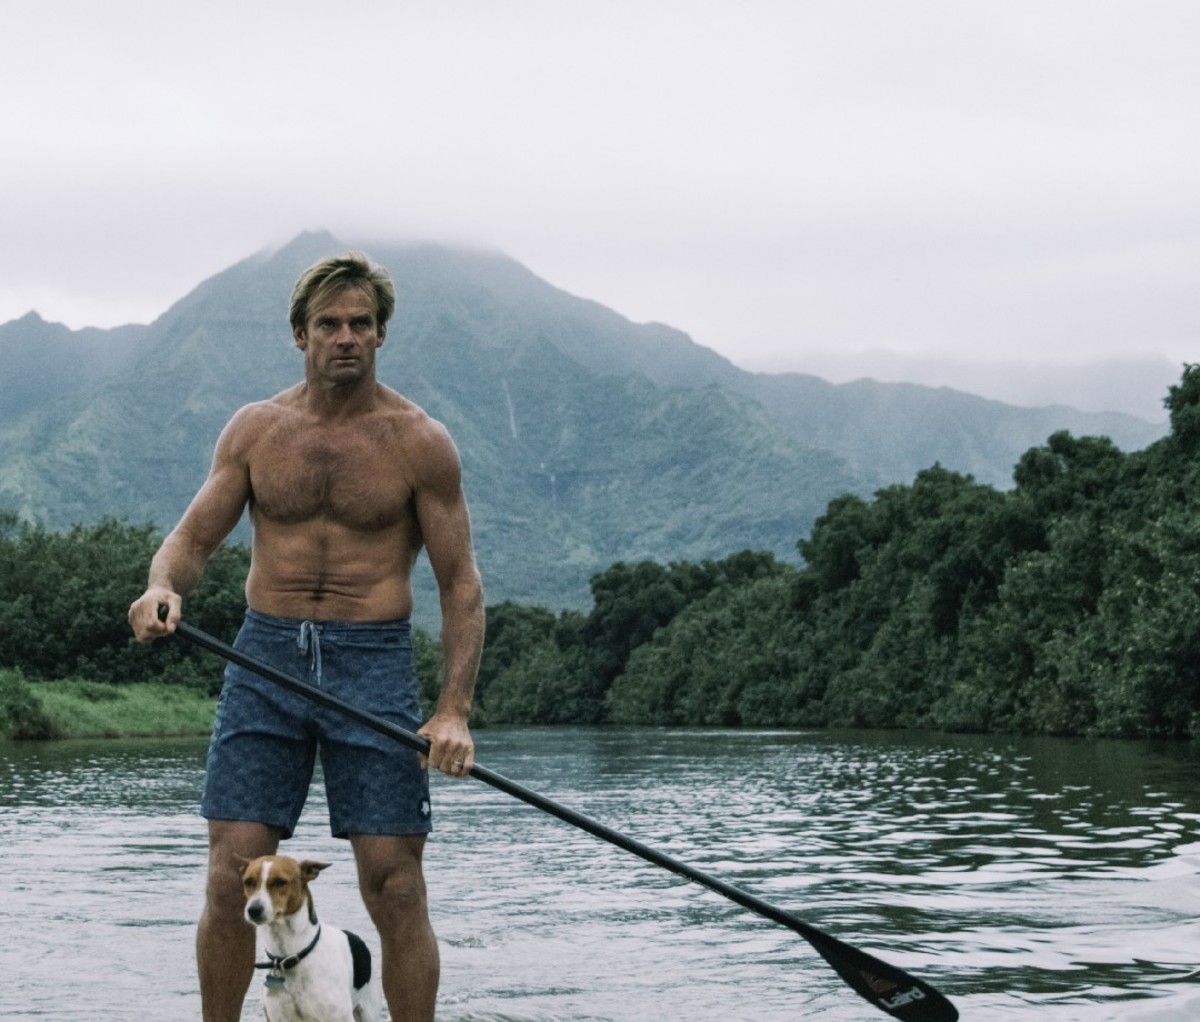 Laird Hamlton on a paddleboard in Hawaii with his dog